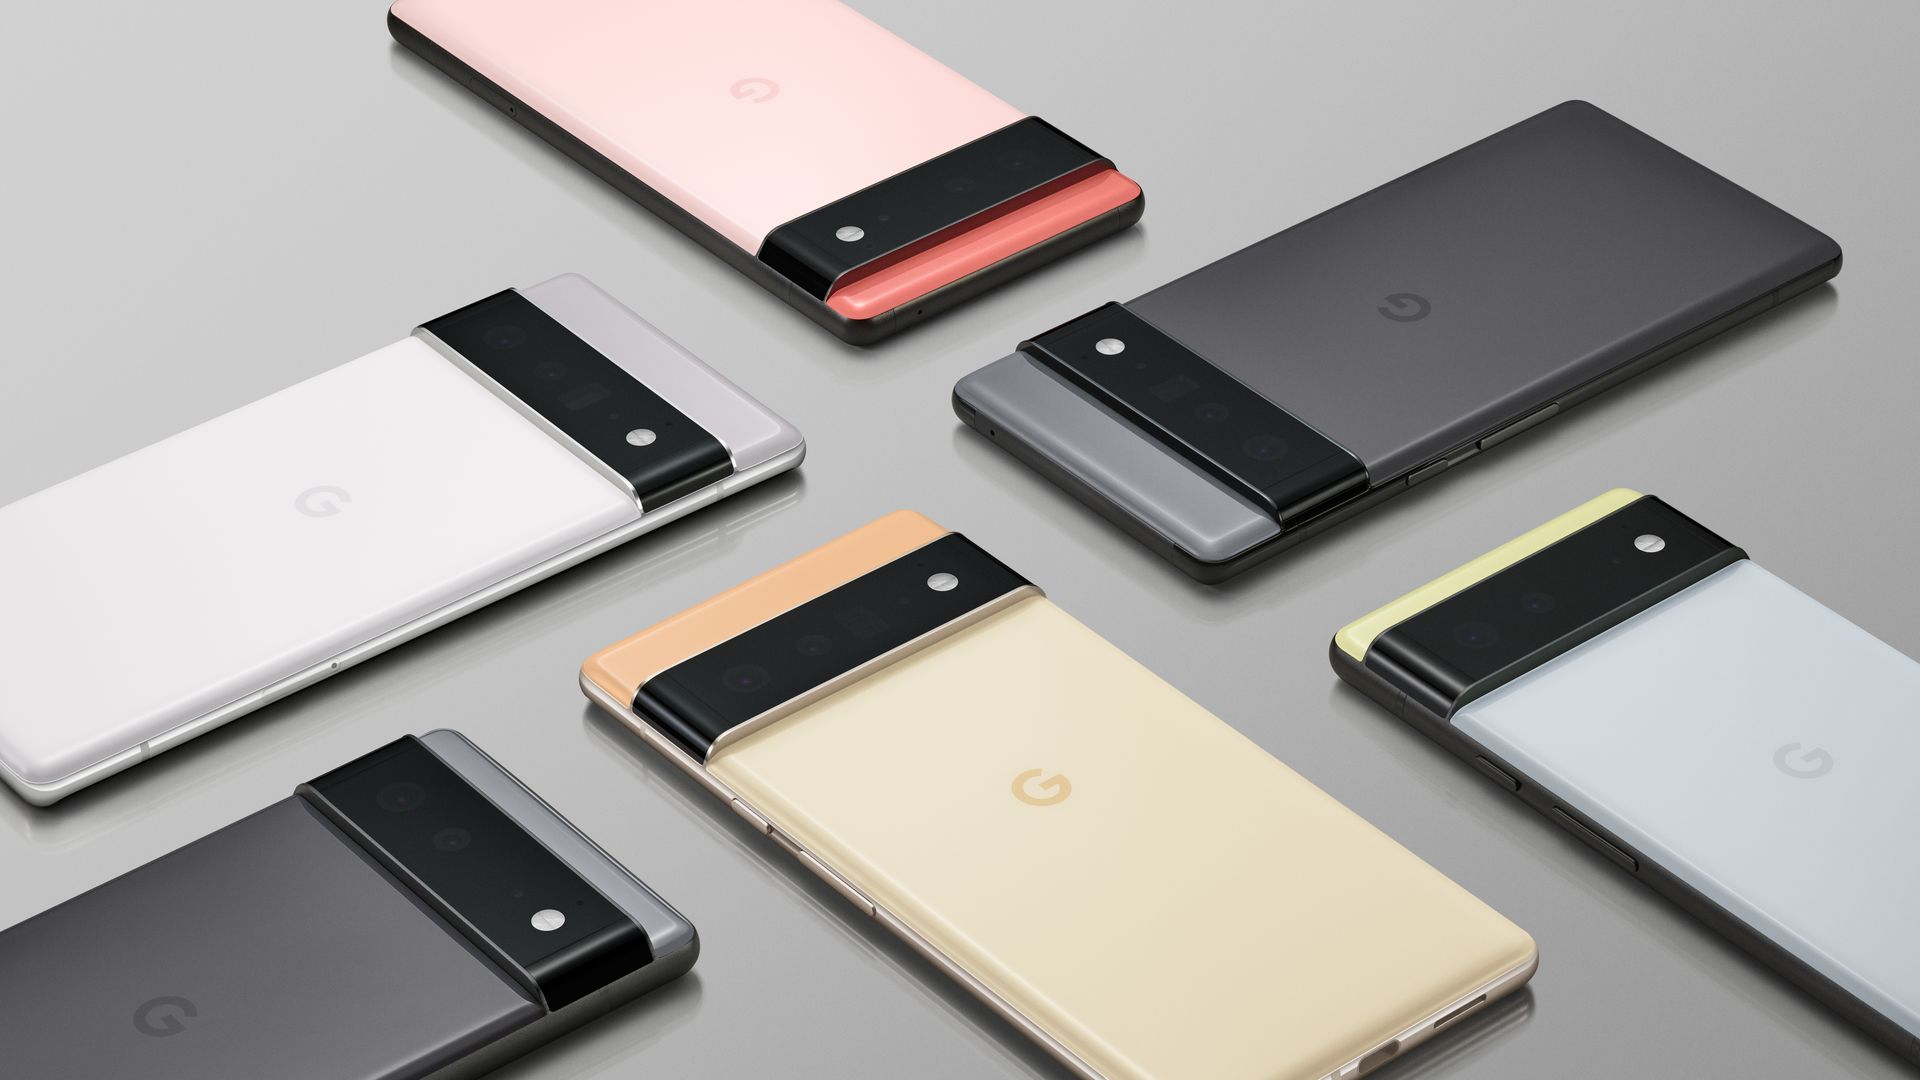 Google's new Pixel 6 smartphone family, in various colors.